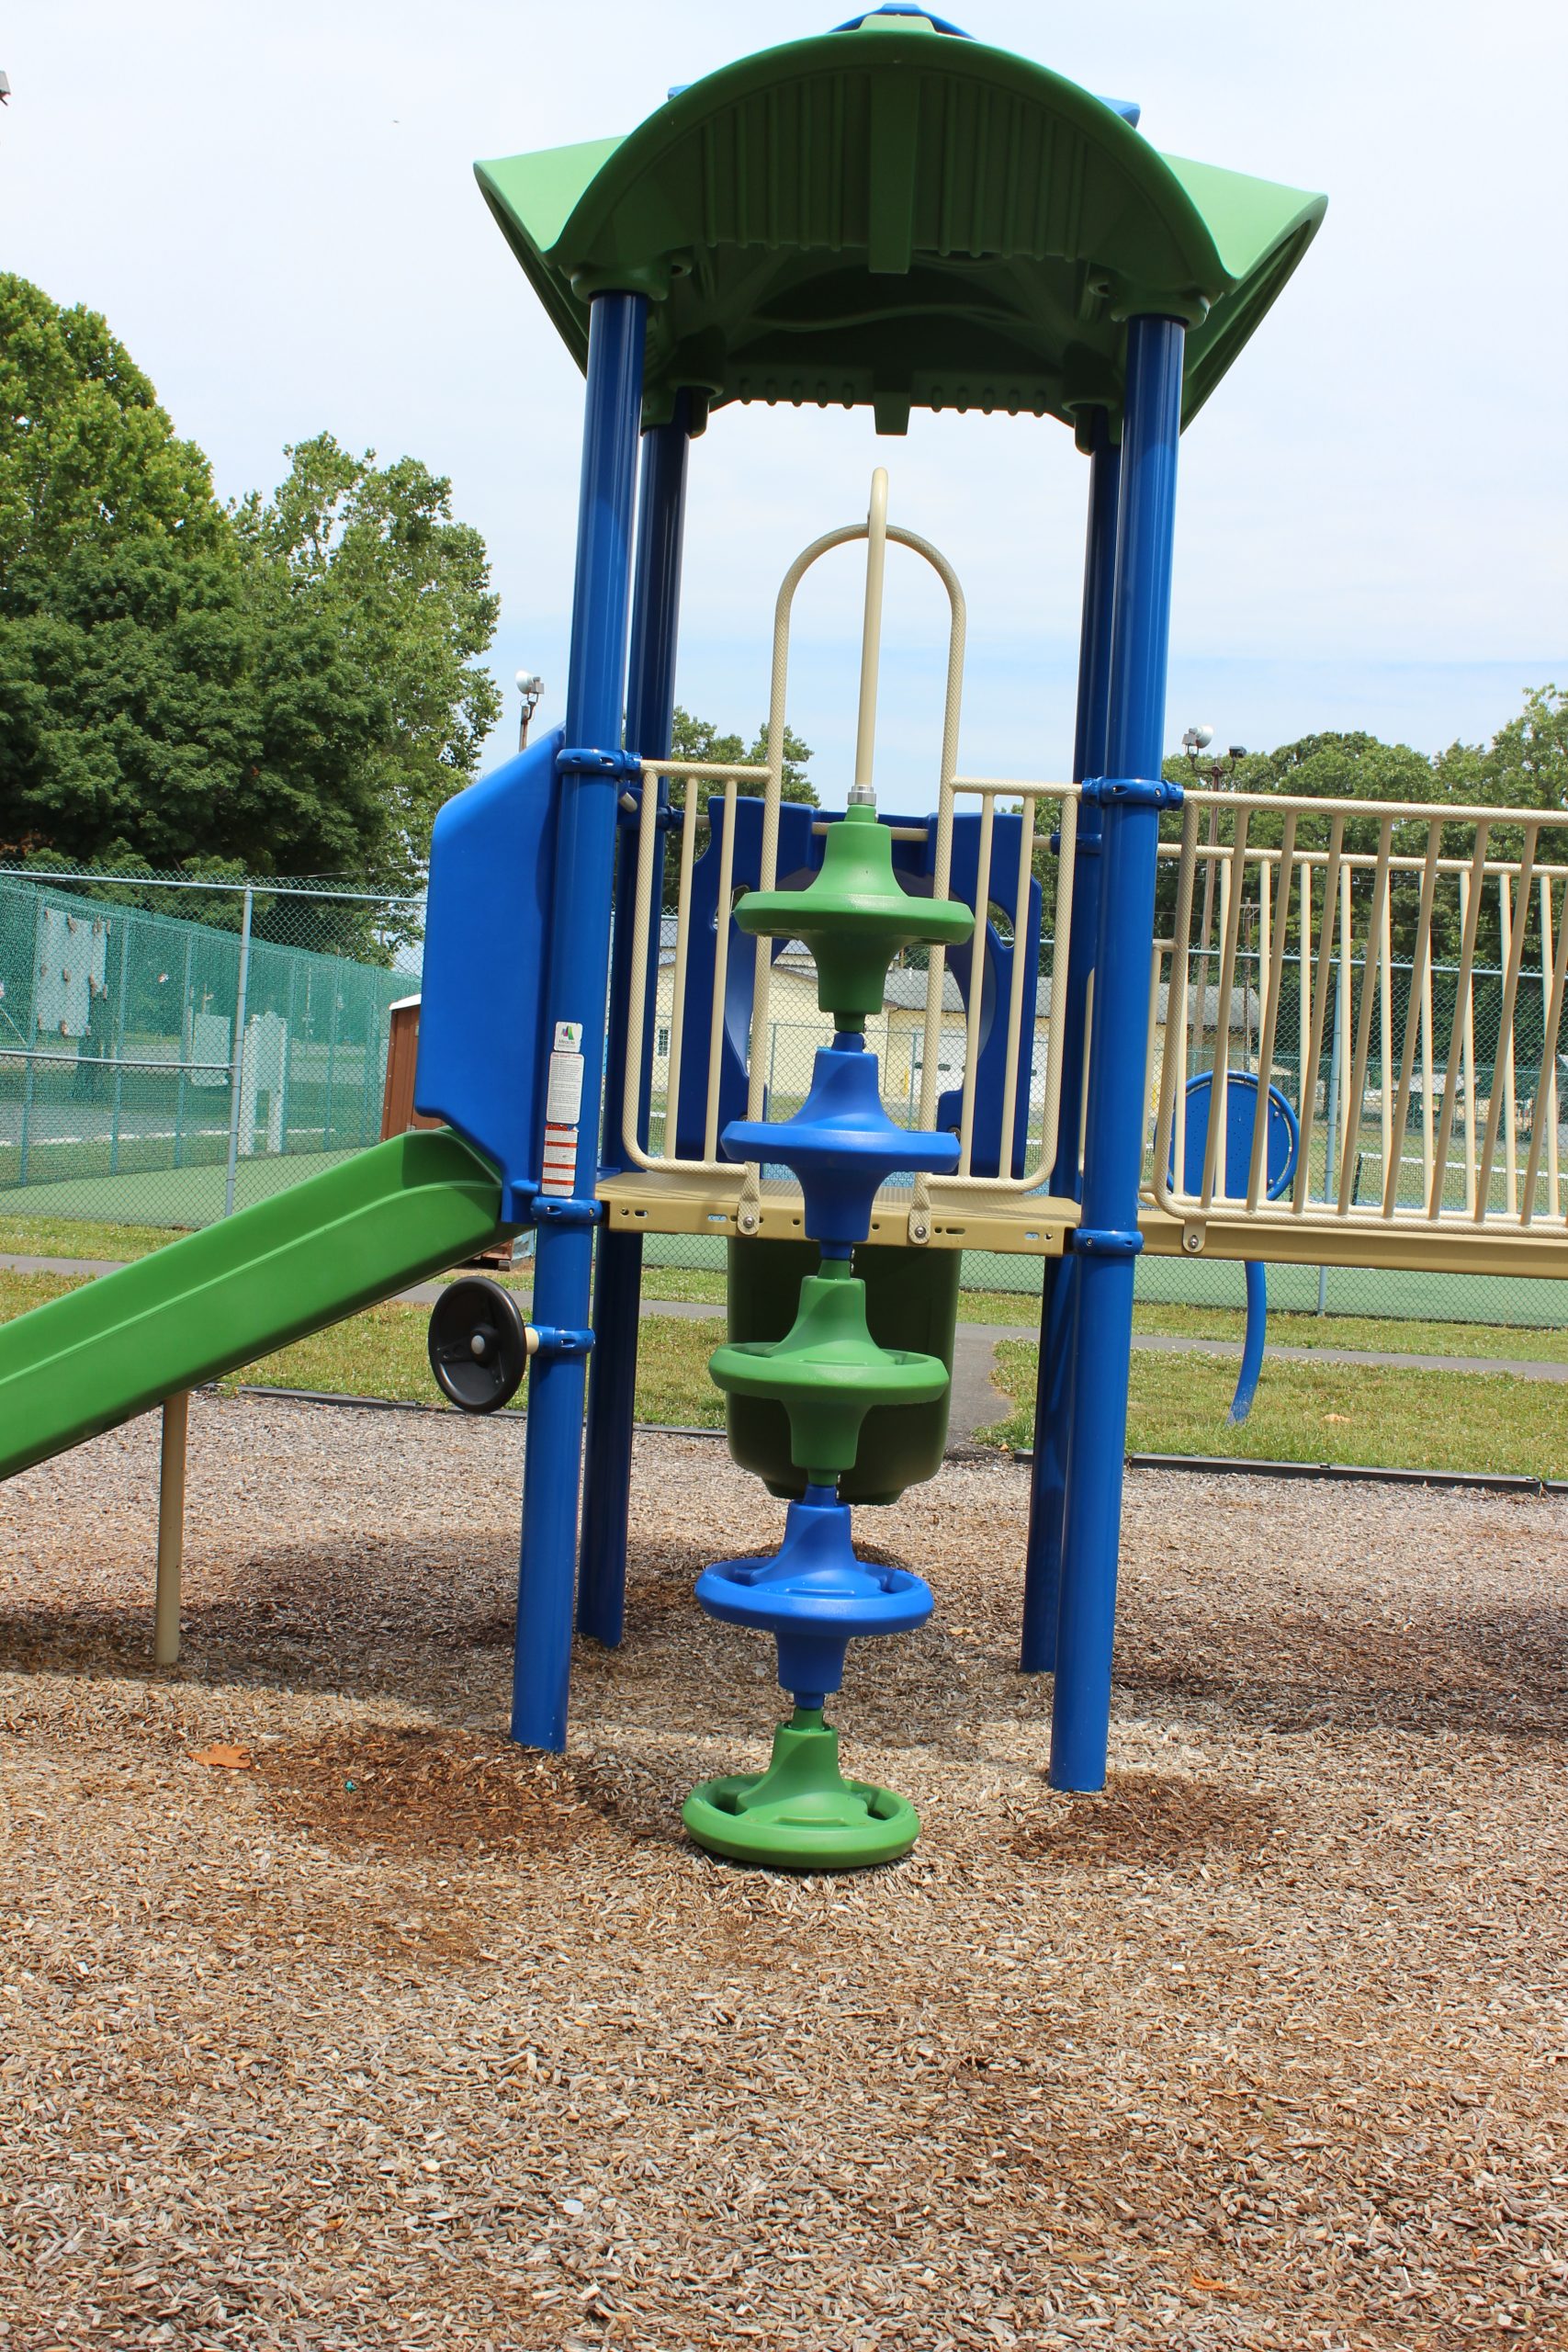 FEATURES - Climbing ladder of discs at Frank LoBiondo Sr. Park Playground in Deerfield Township NJ